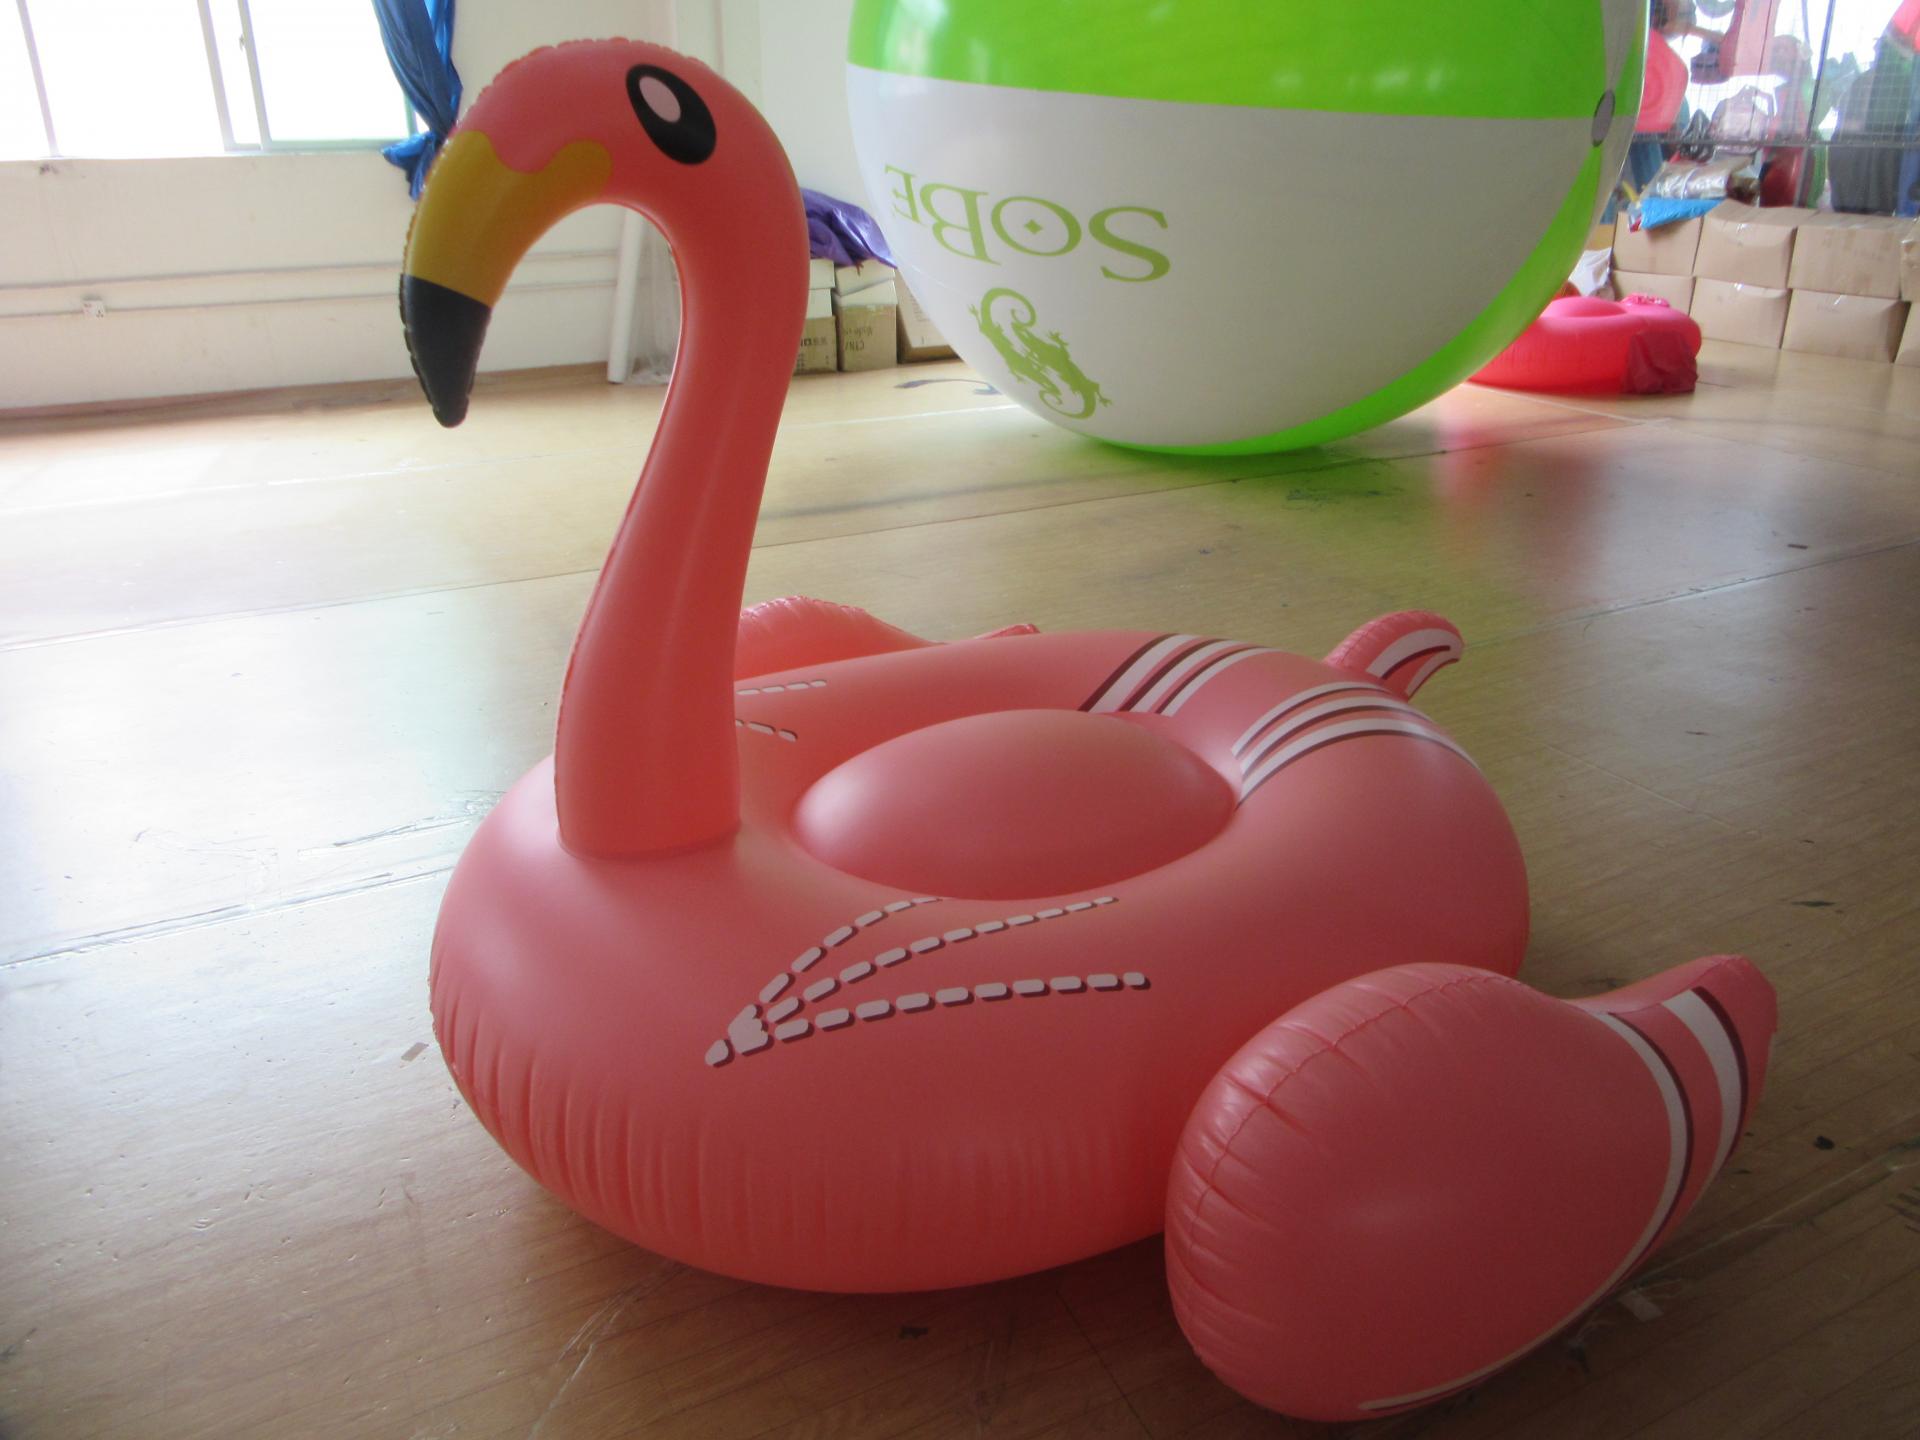 Customised Inflatable Flamingo Light Pink On Sale Rideable Rider Blow Up Summer Beach Swimming Pool